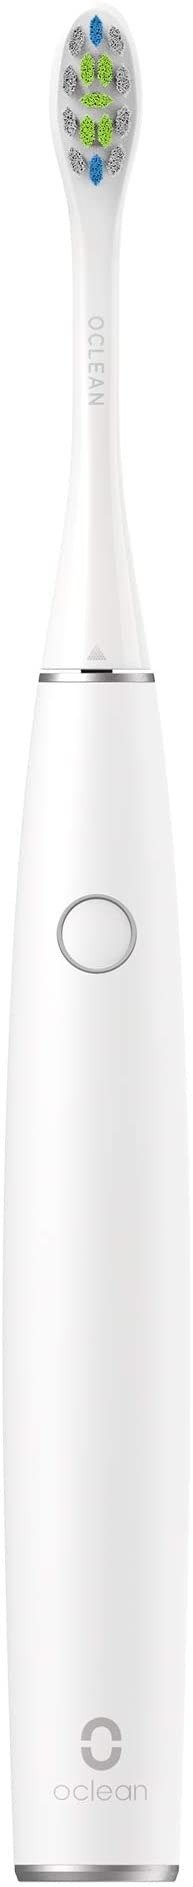 Ultra Quiet Oclean Air 2 Smart Sonic Electric Toothbrush, Portable and Long-Lasting 30 Days Battery Life 2.5 H Fast Charging IPX 7 Waterproof - White